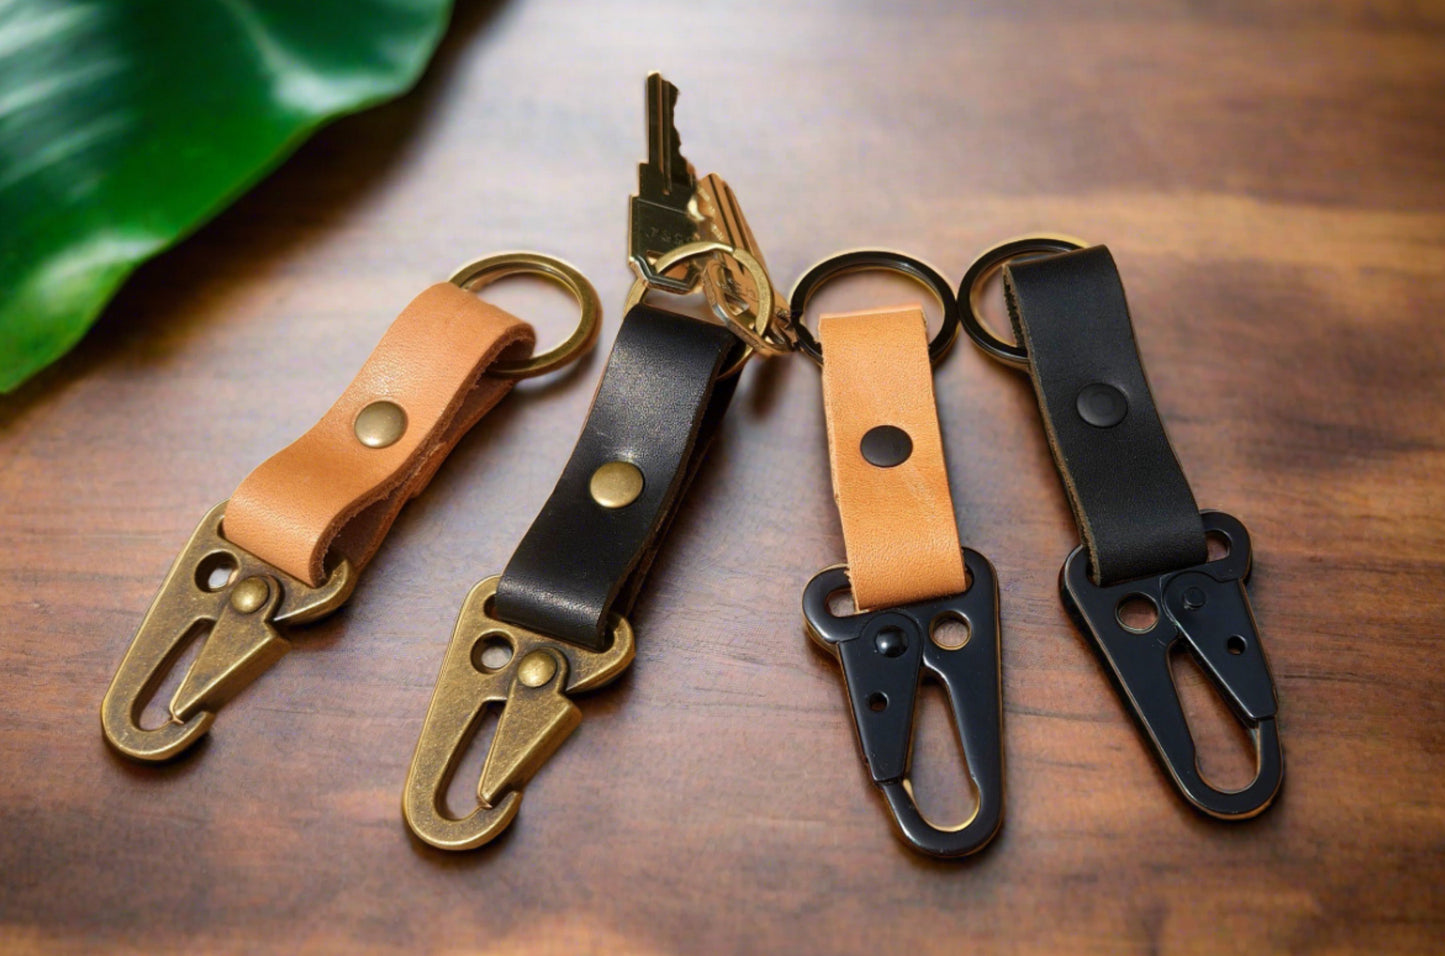 Leather Tactical HK clip keychain - Military Style Key ring